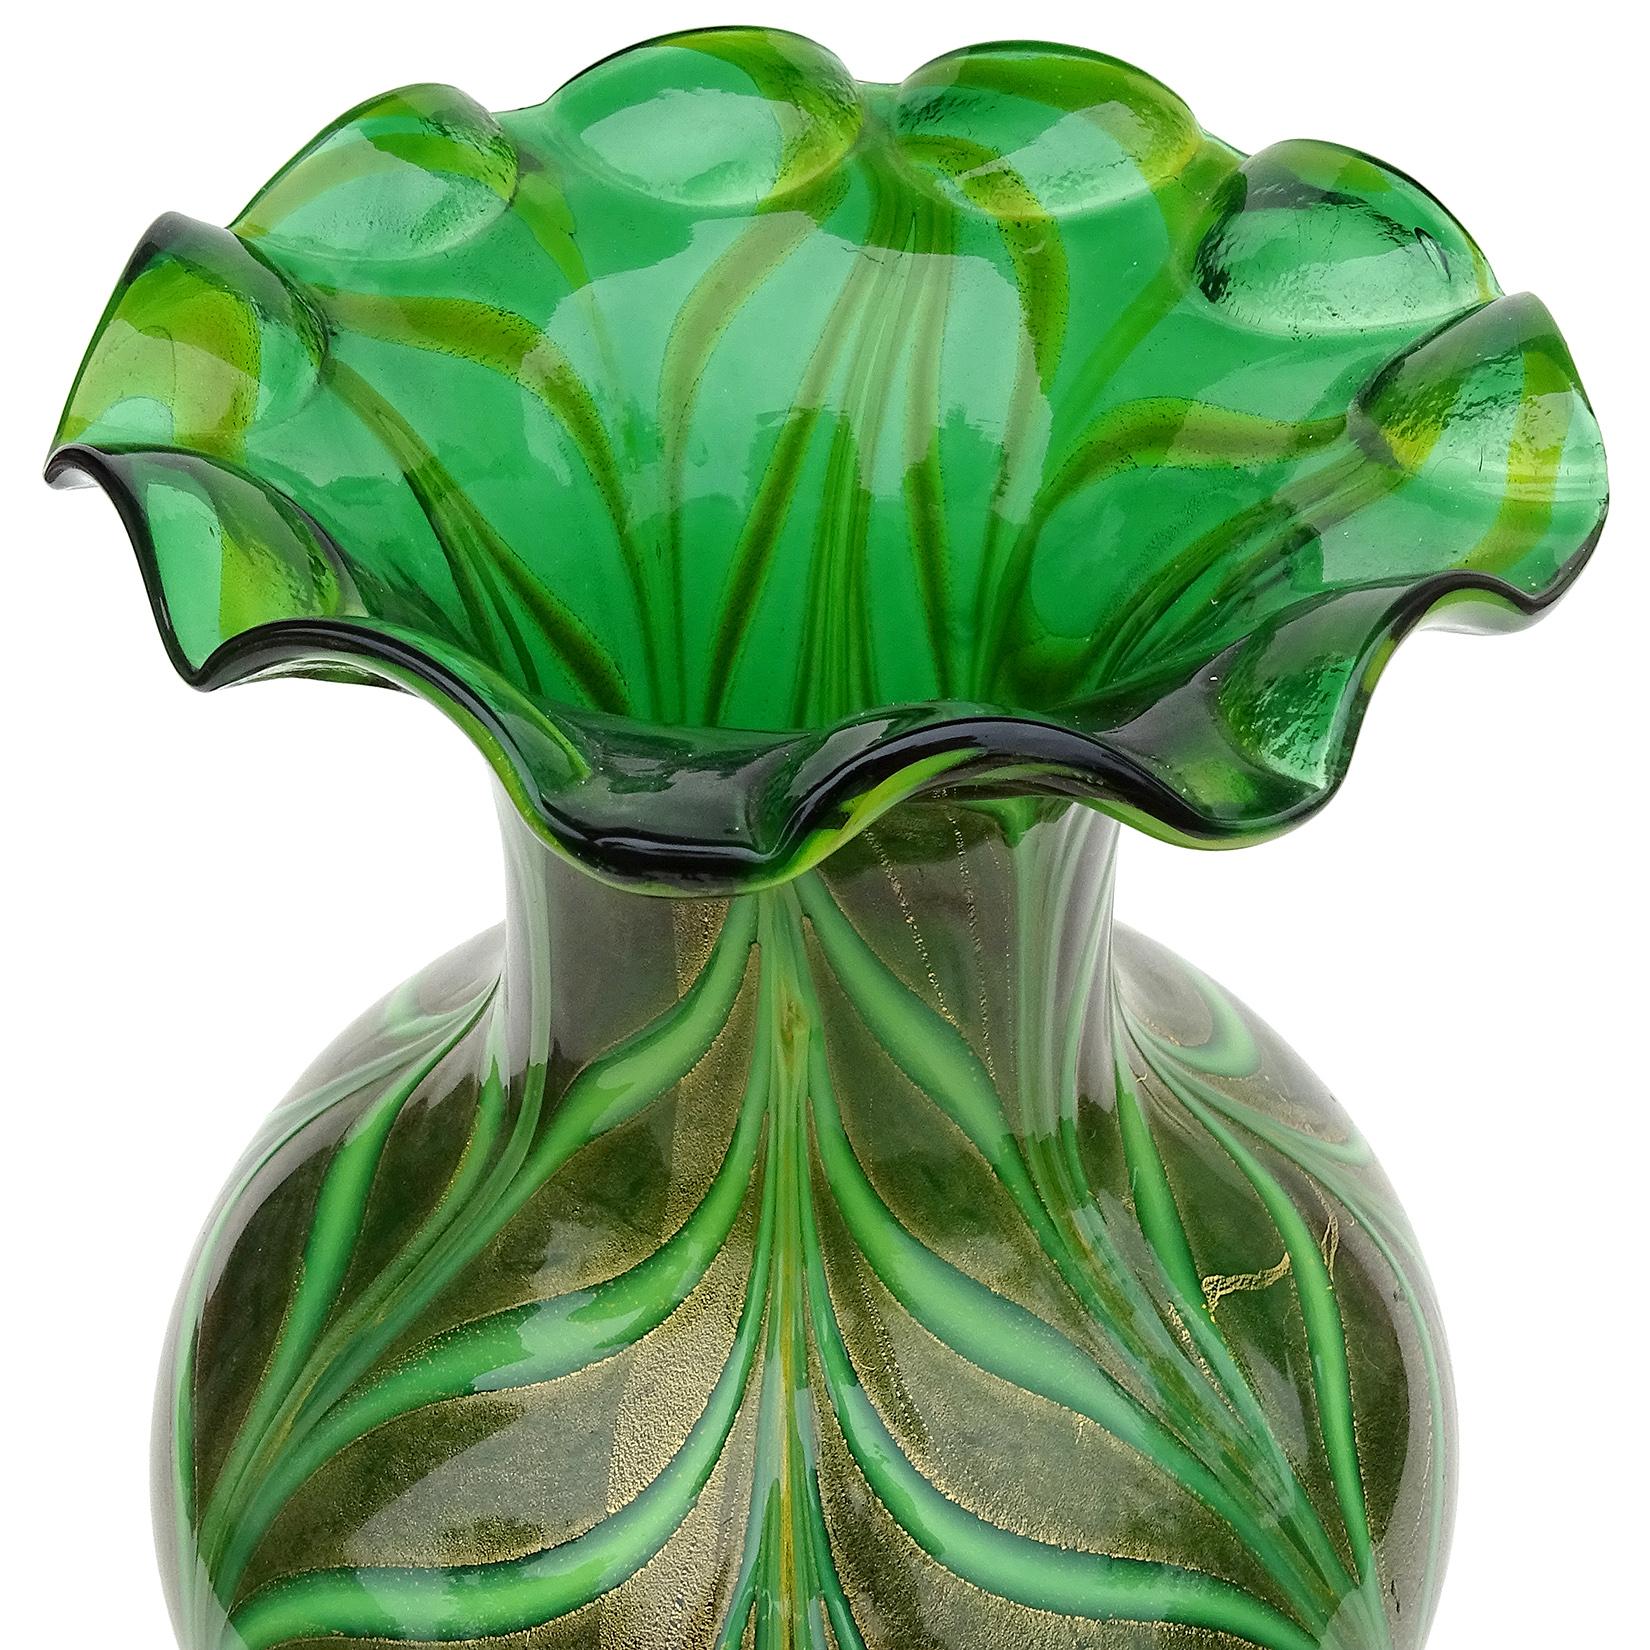 Beautiful vintage Murano hand blown dark and bright green, with gold flecks, Italian art glass flower vase. The vase is created in a Venetian style, in the manner of the Fratelli Toso and Salviati companies. Has a pulled feather or 